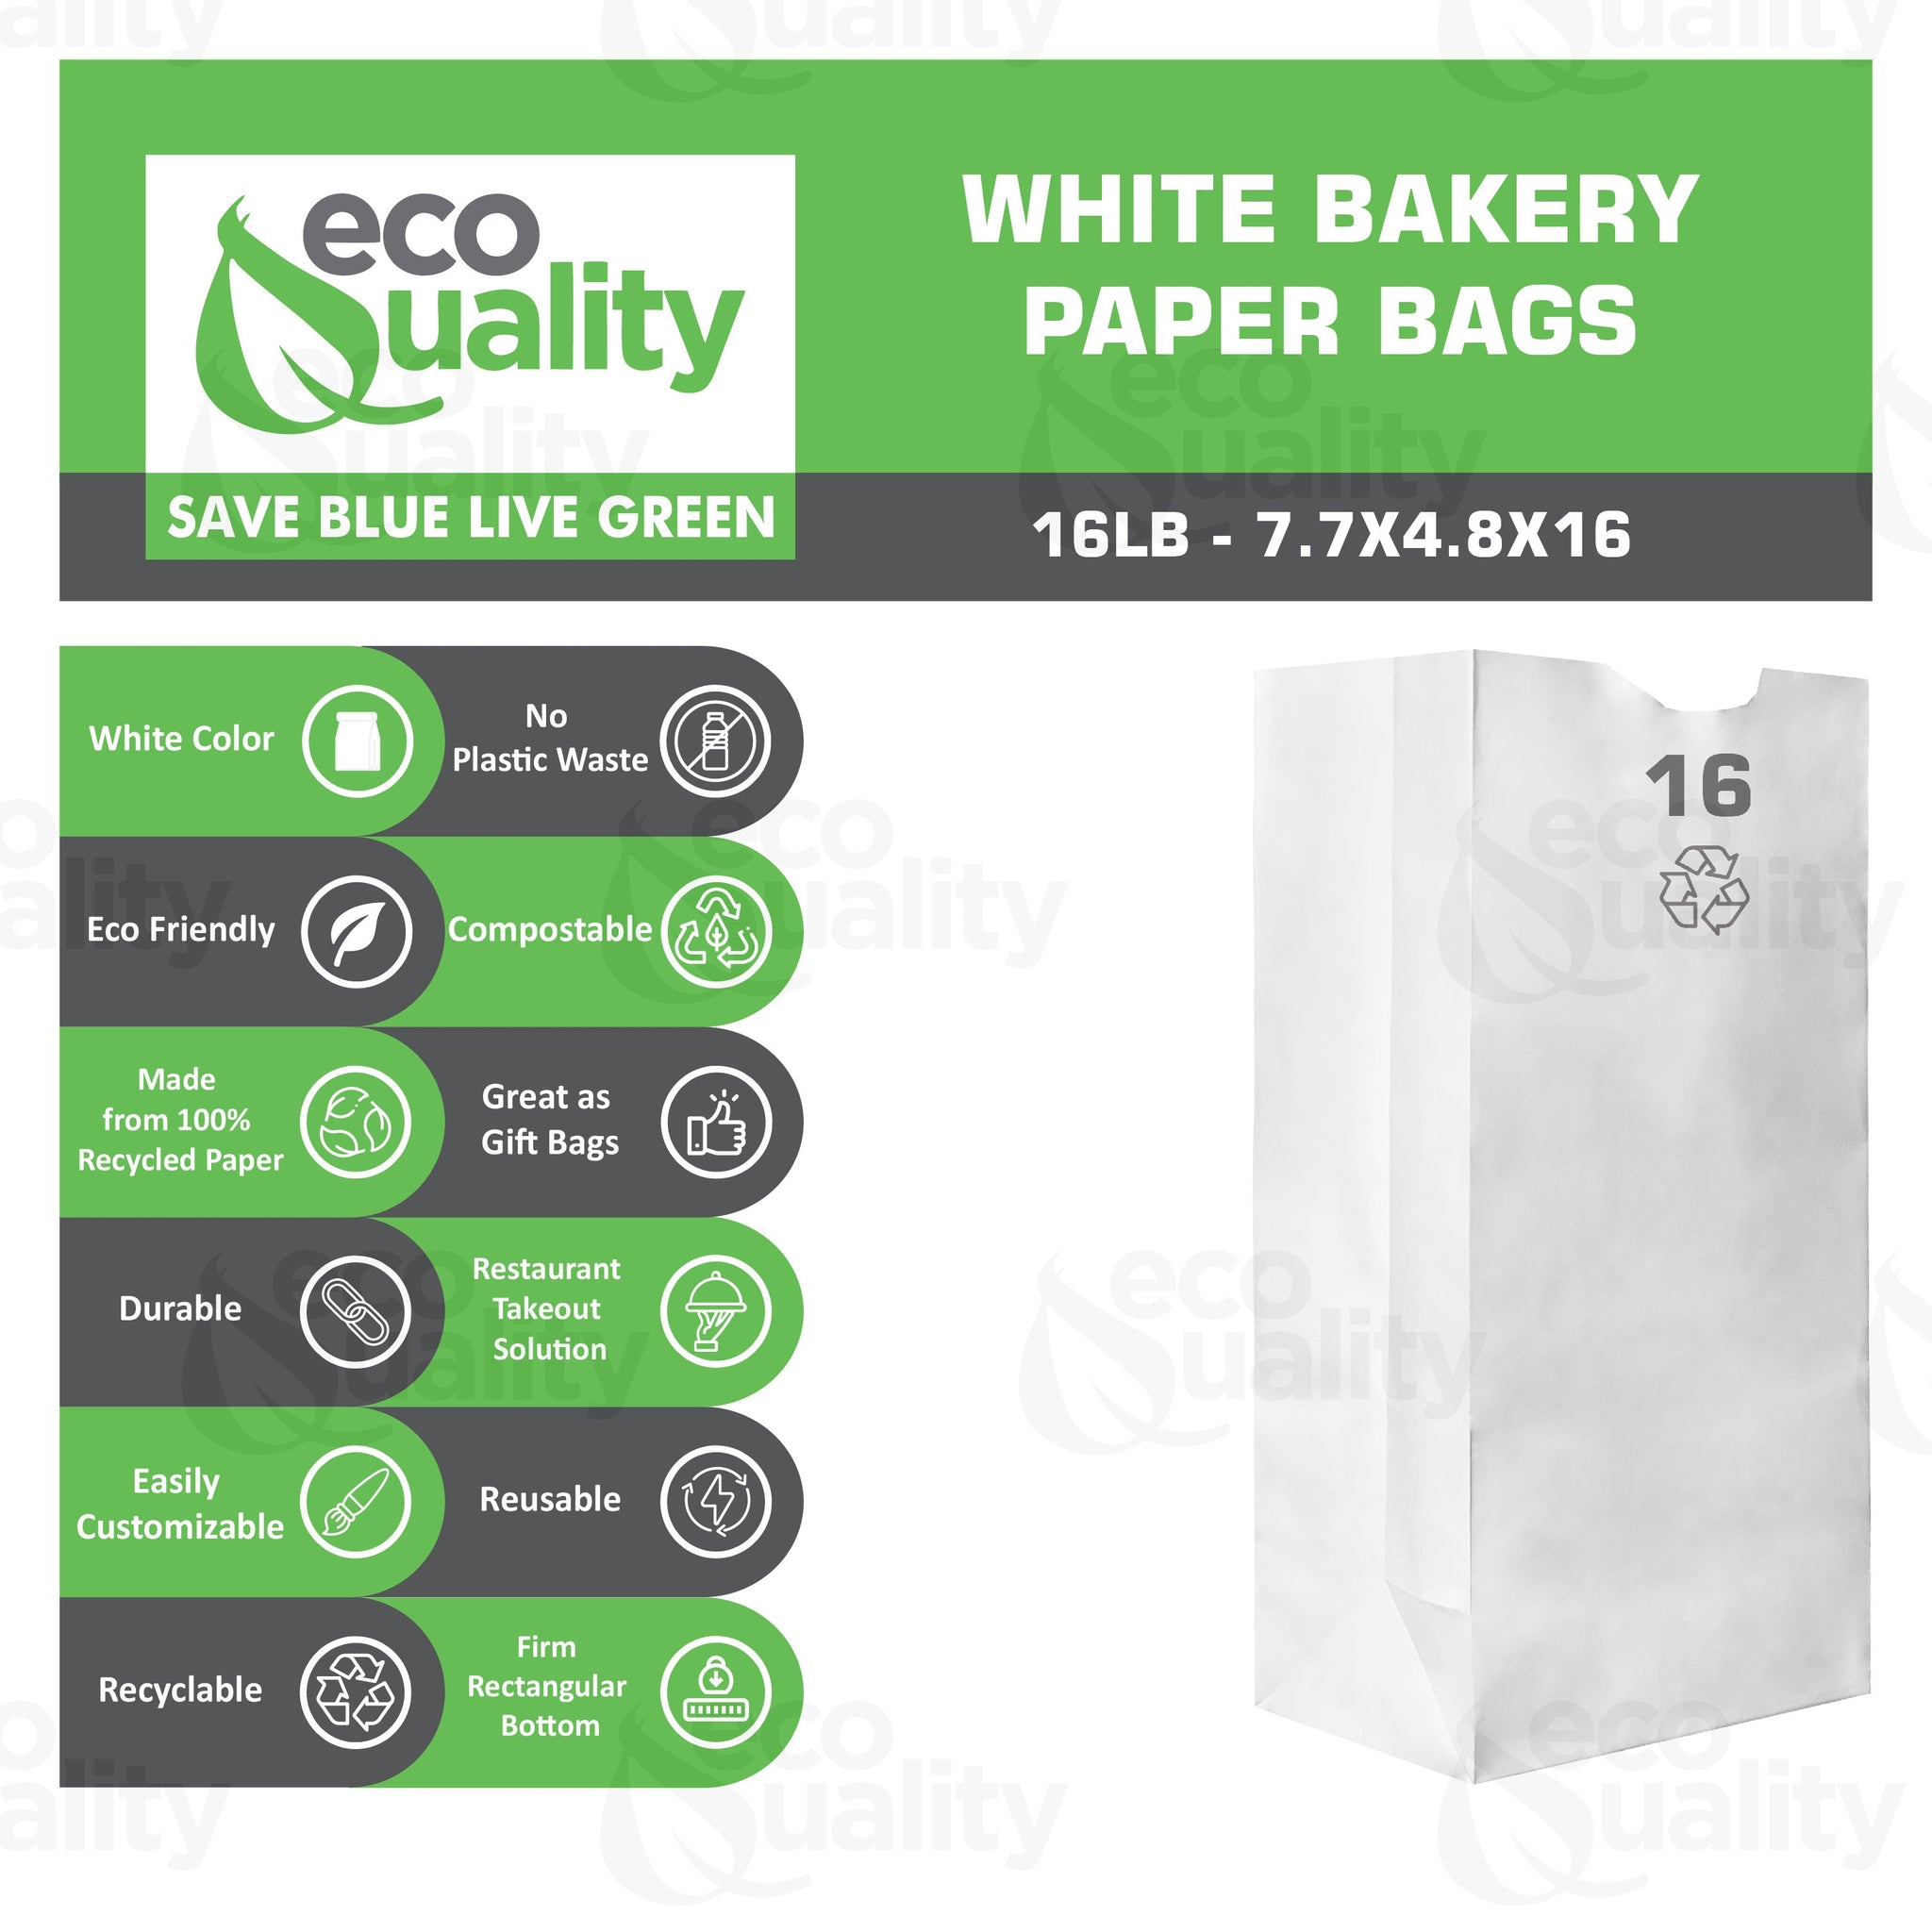 disposable bag White Paper Bags white Paper Shopping Bags foldable paper bag catering bags white kraft paper bag 1 pound candy bag snack bag gift bags DIY Bags arts and craft Sandwich Bag white paper bag party favor bag lunch bag togo bag takeout bag Restaurant supplies paper bakery bags Kraft Paper Bags kraft grocery bags supermarket Household Supplies hero bread tall long paper bag 16 pound